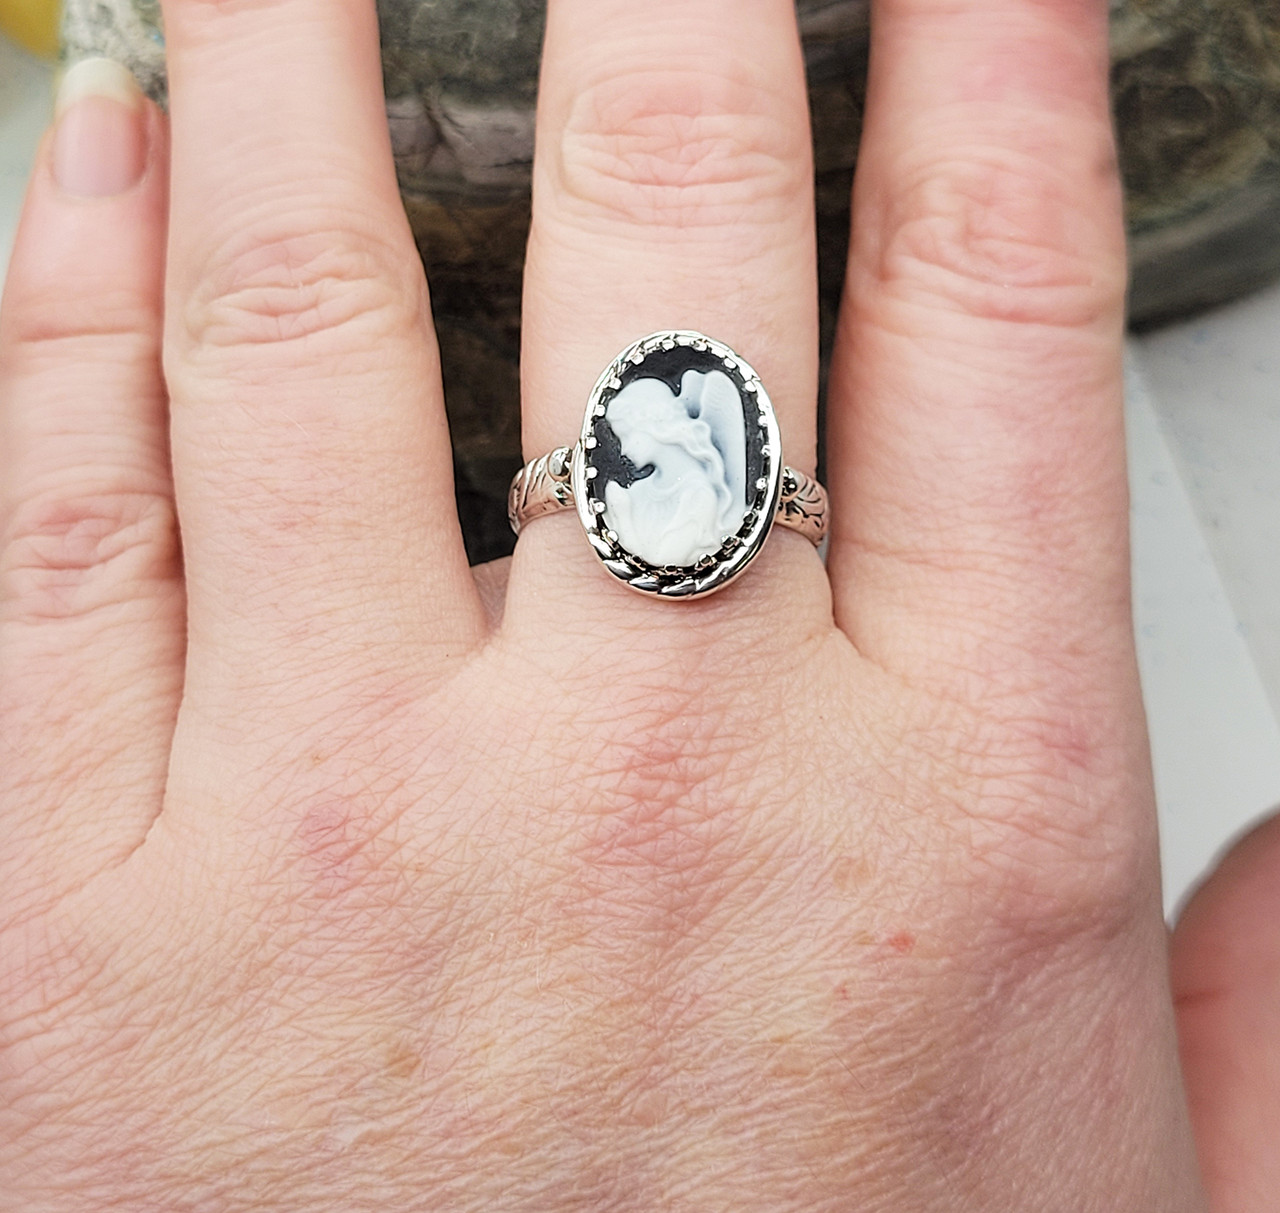 Cameo Ring, Sterling Silver Ring, Beautiful Cameo Jewelry, Old Fashion Ring,  Big Stone Ring, Light Blue Ring,bridesmaid Gift,victorian Style - Etsy